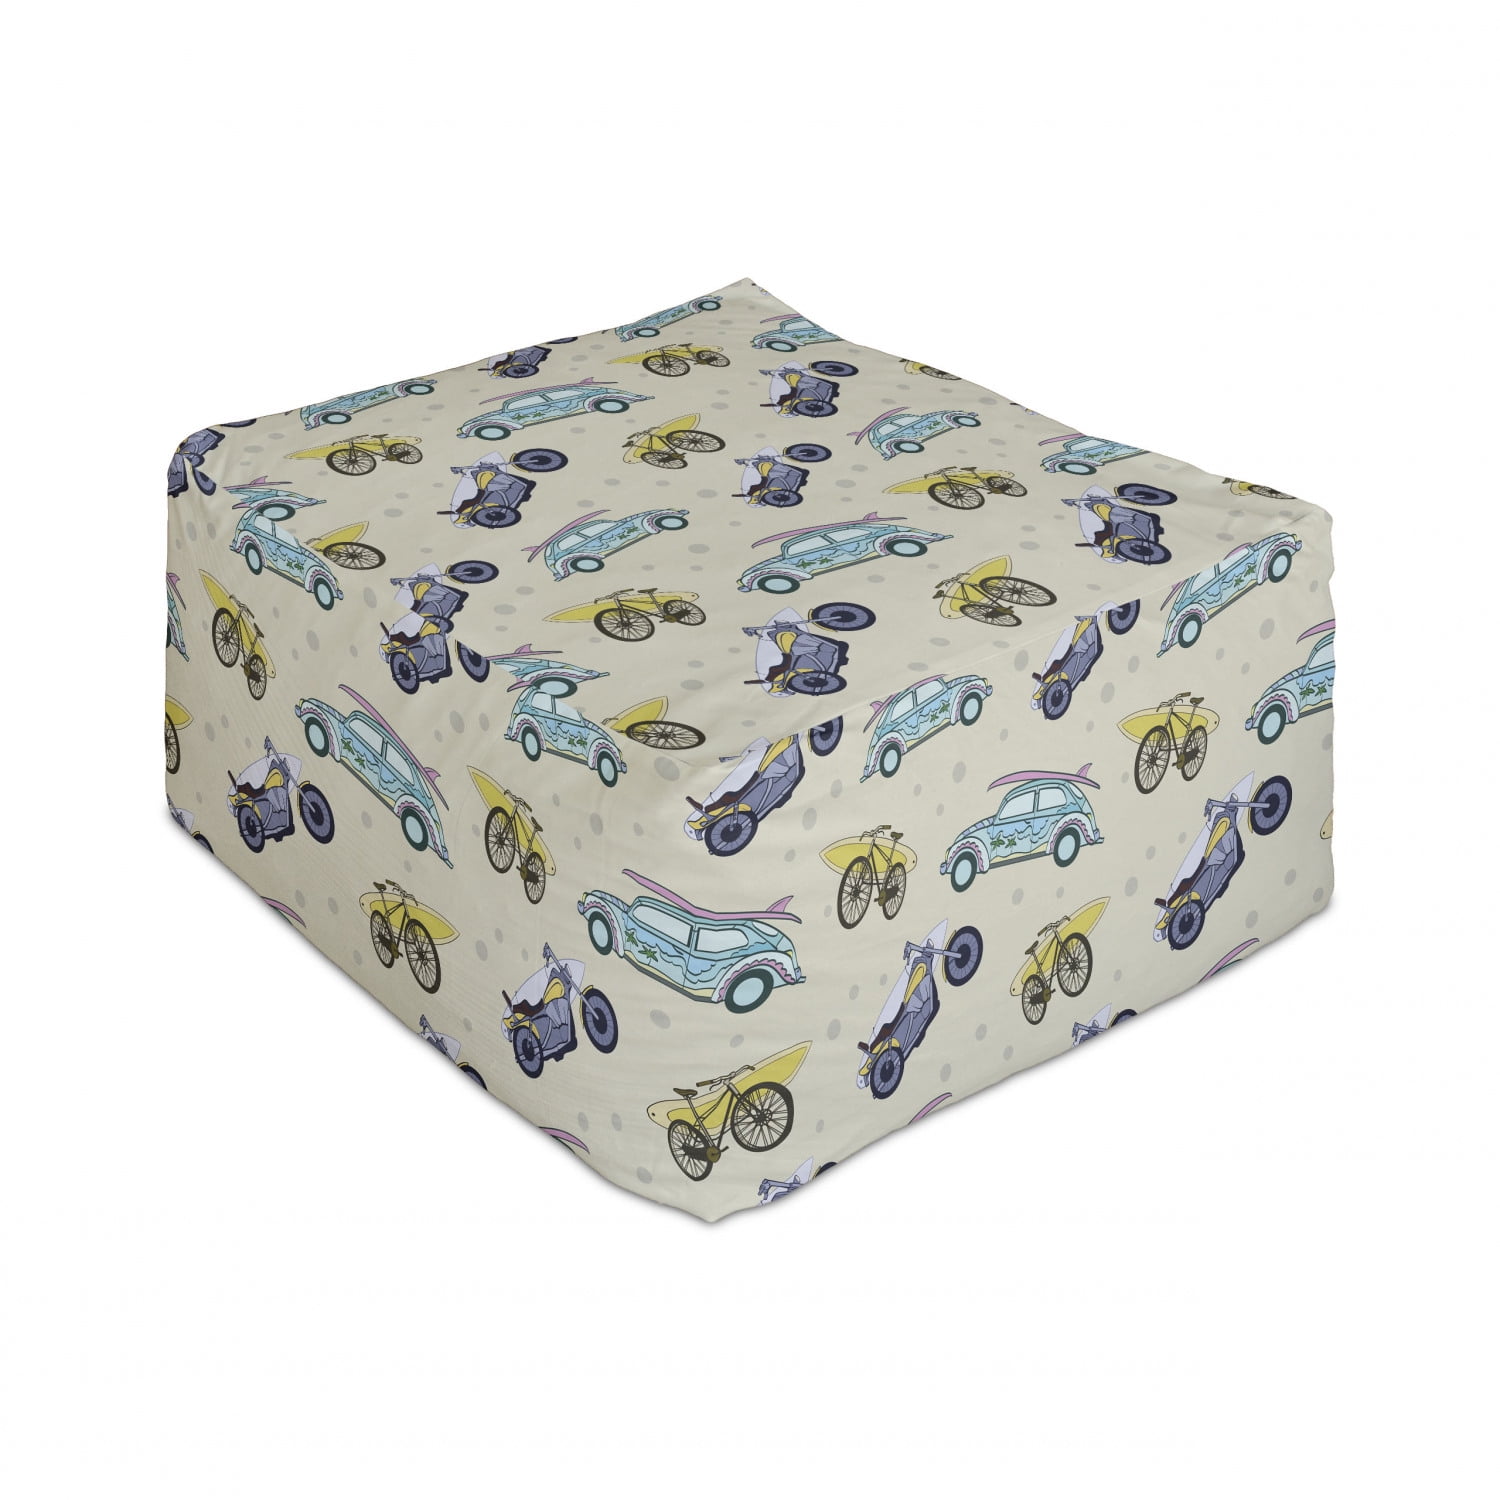 Under Desk Foot Stool for Living Room Office Ottoman with Cover Rhythmic Motifs of Sailboats Nautical Theme on a Plain Backdrop Marine Lifestyle Ambesonne Boat Rectangle Pouf 25 Multicolor 